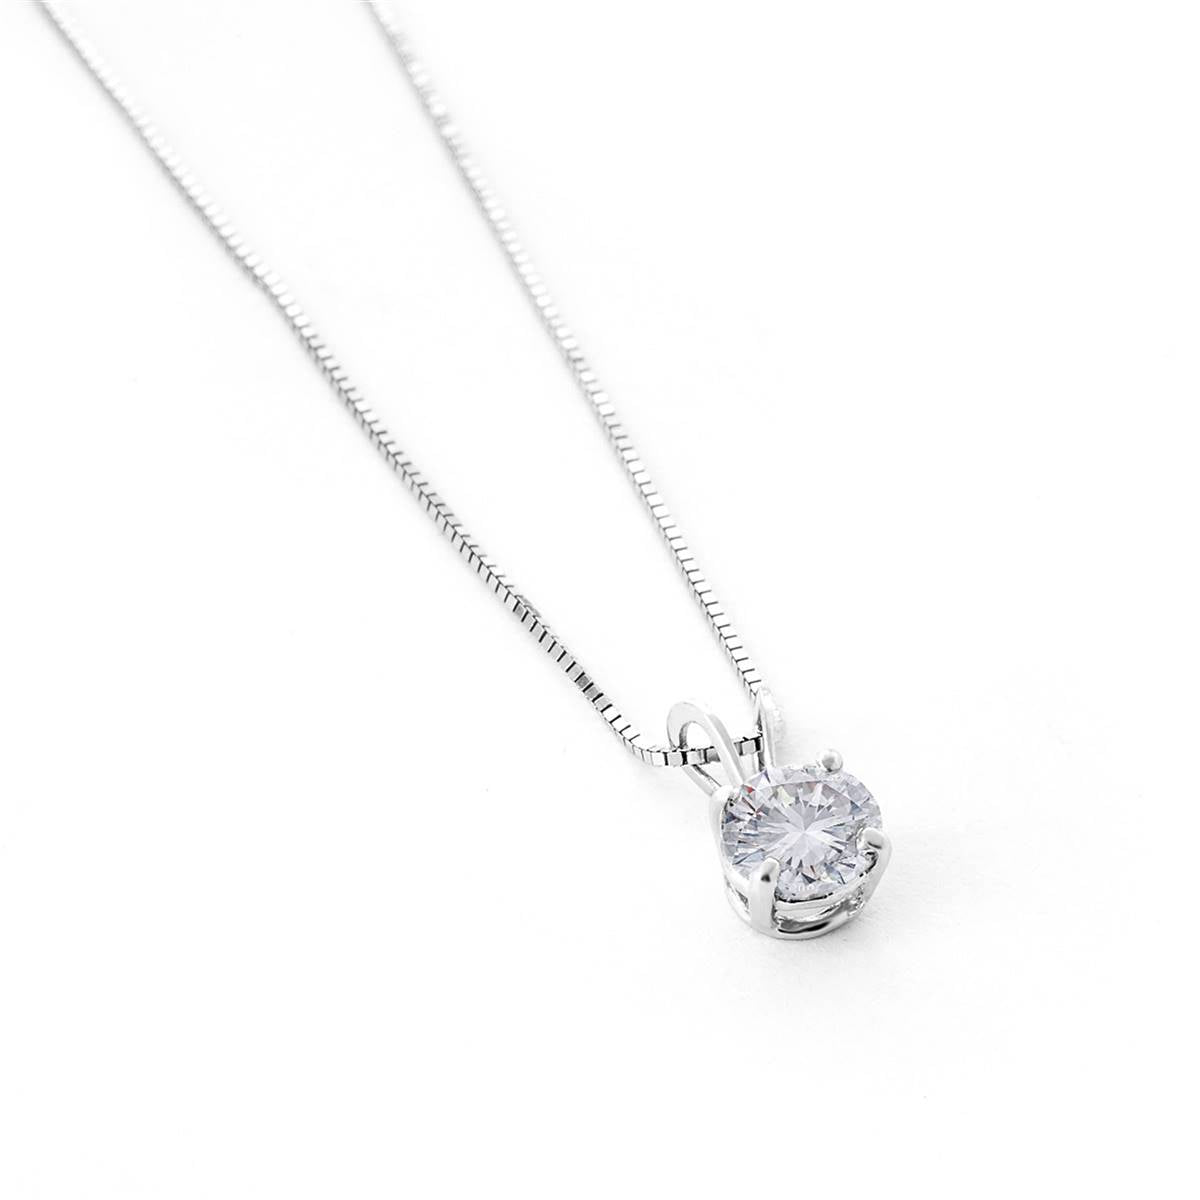 0.5 Carat 14K Solid White Gold Be Counted Diamond Necklace